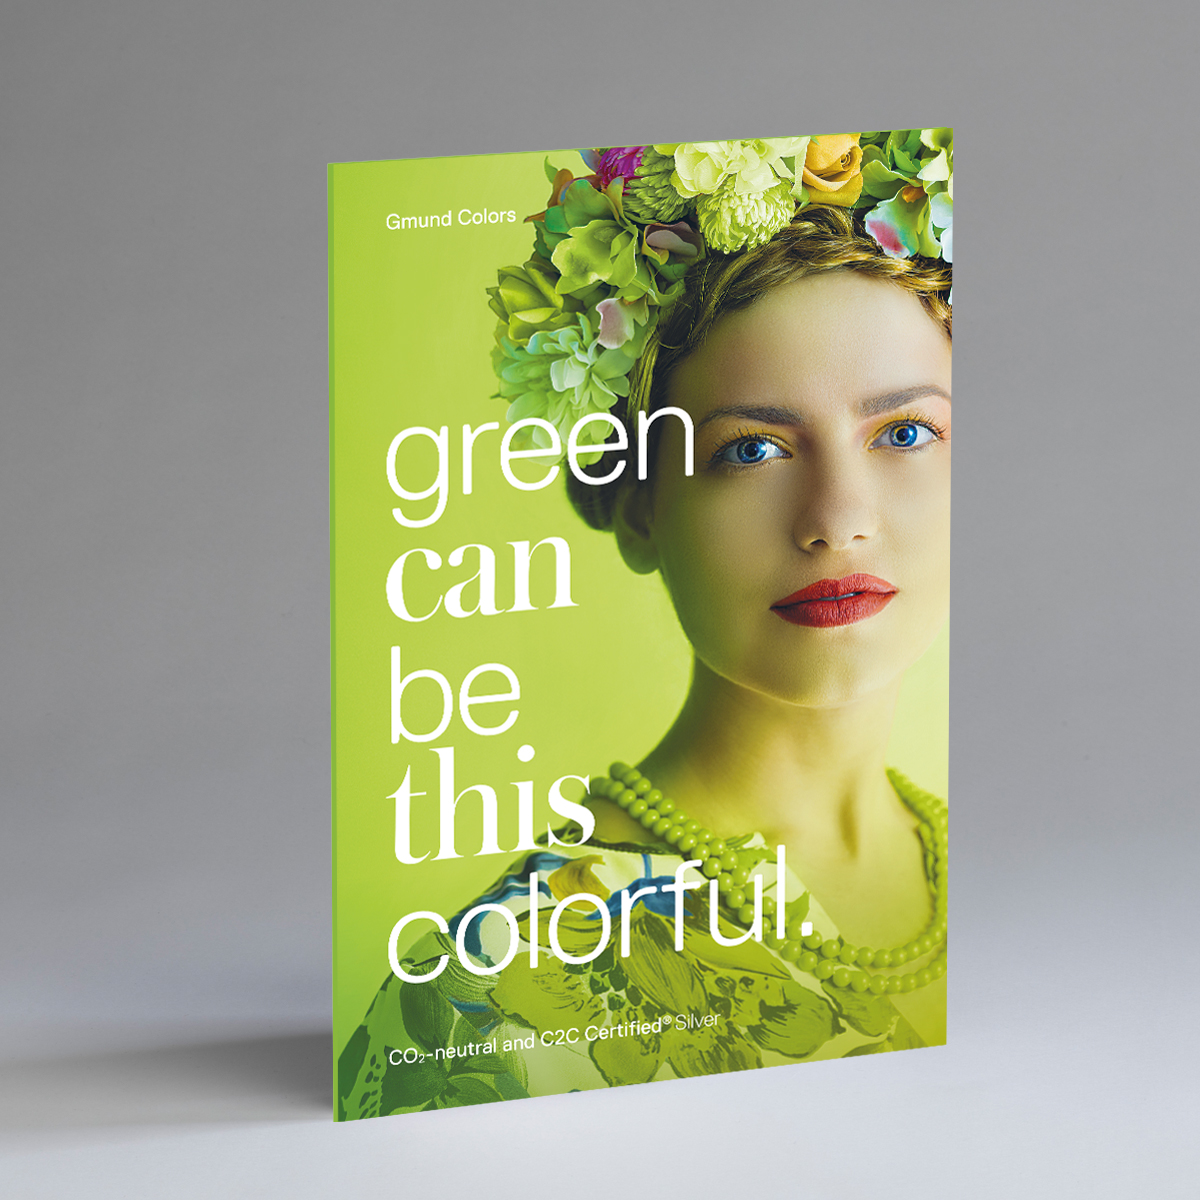 Brochure Gmund Colors Sustainability English